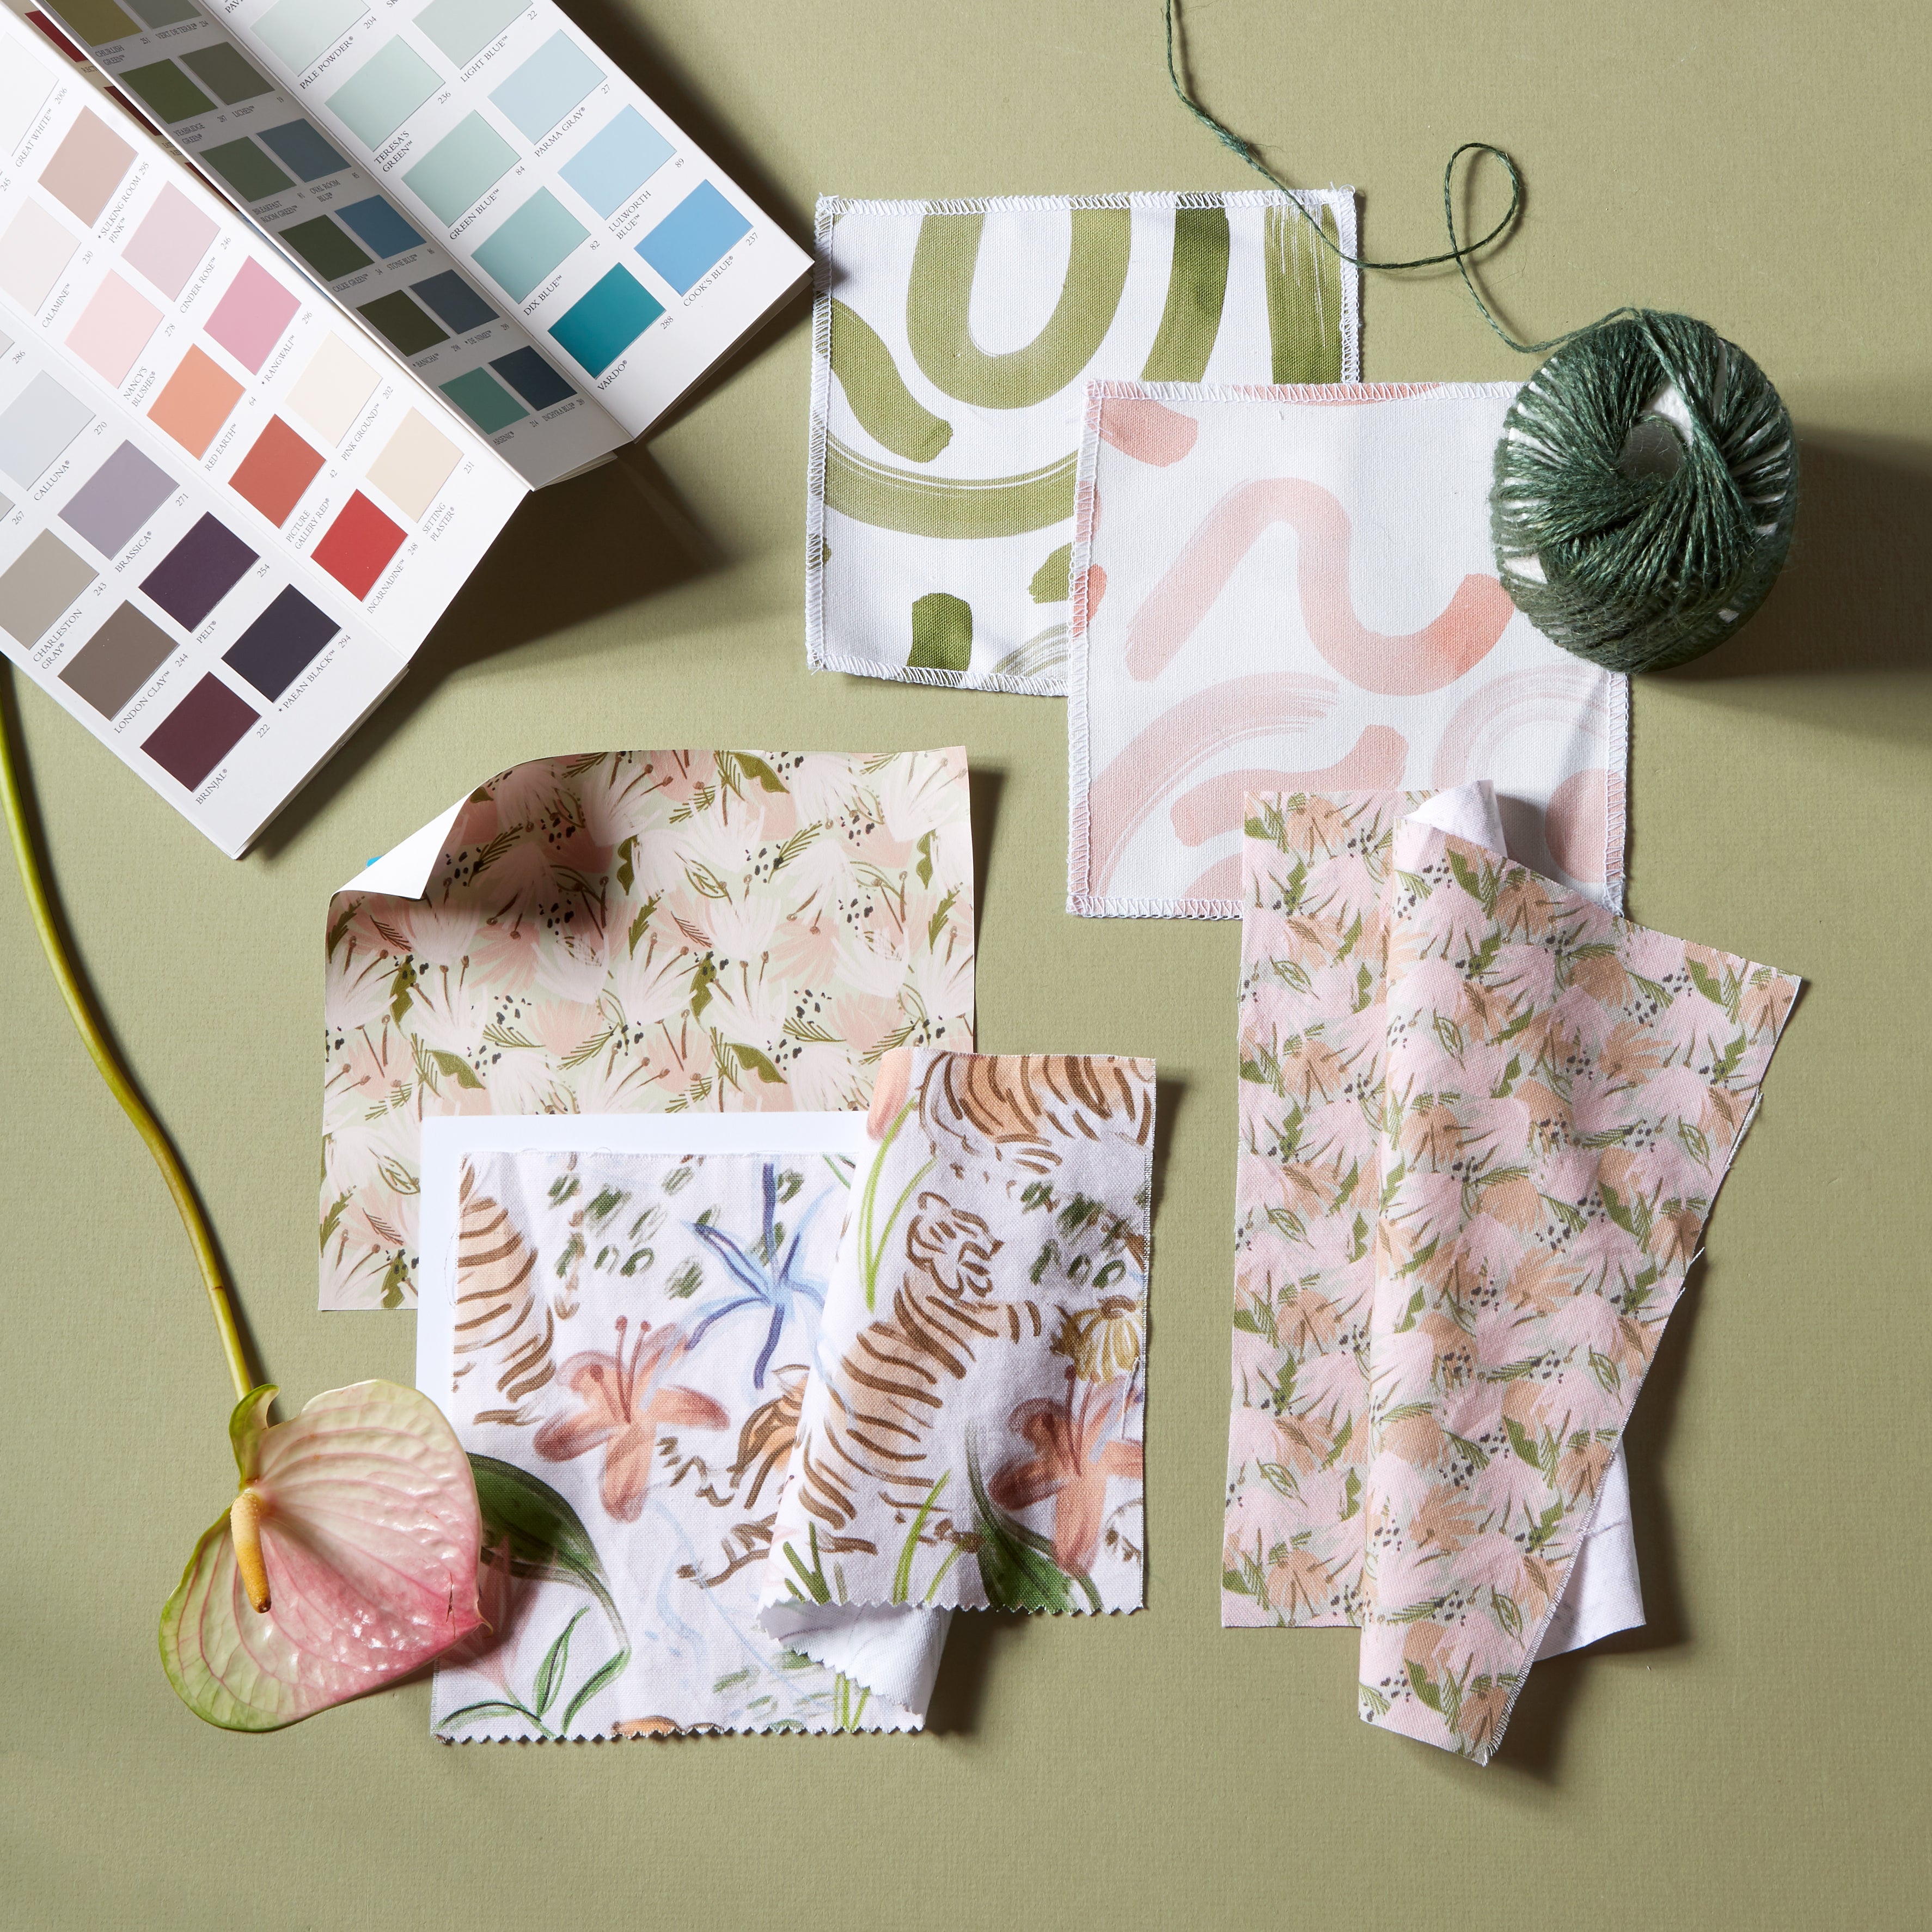 Interior design moodboard and fabric inspirations with Moss Green Printed Swatch, Pink Floral Printed Swatch, and Pink Chinoiserie Tiger Printed Swatch